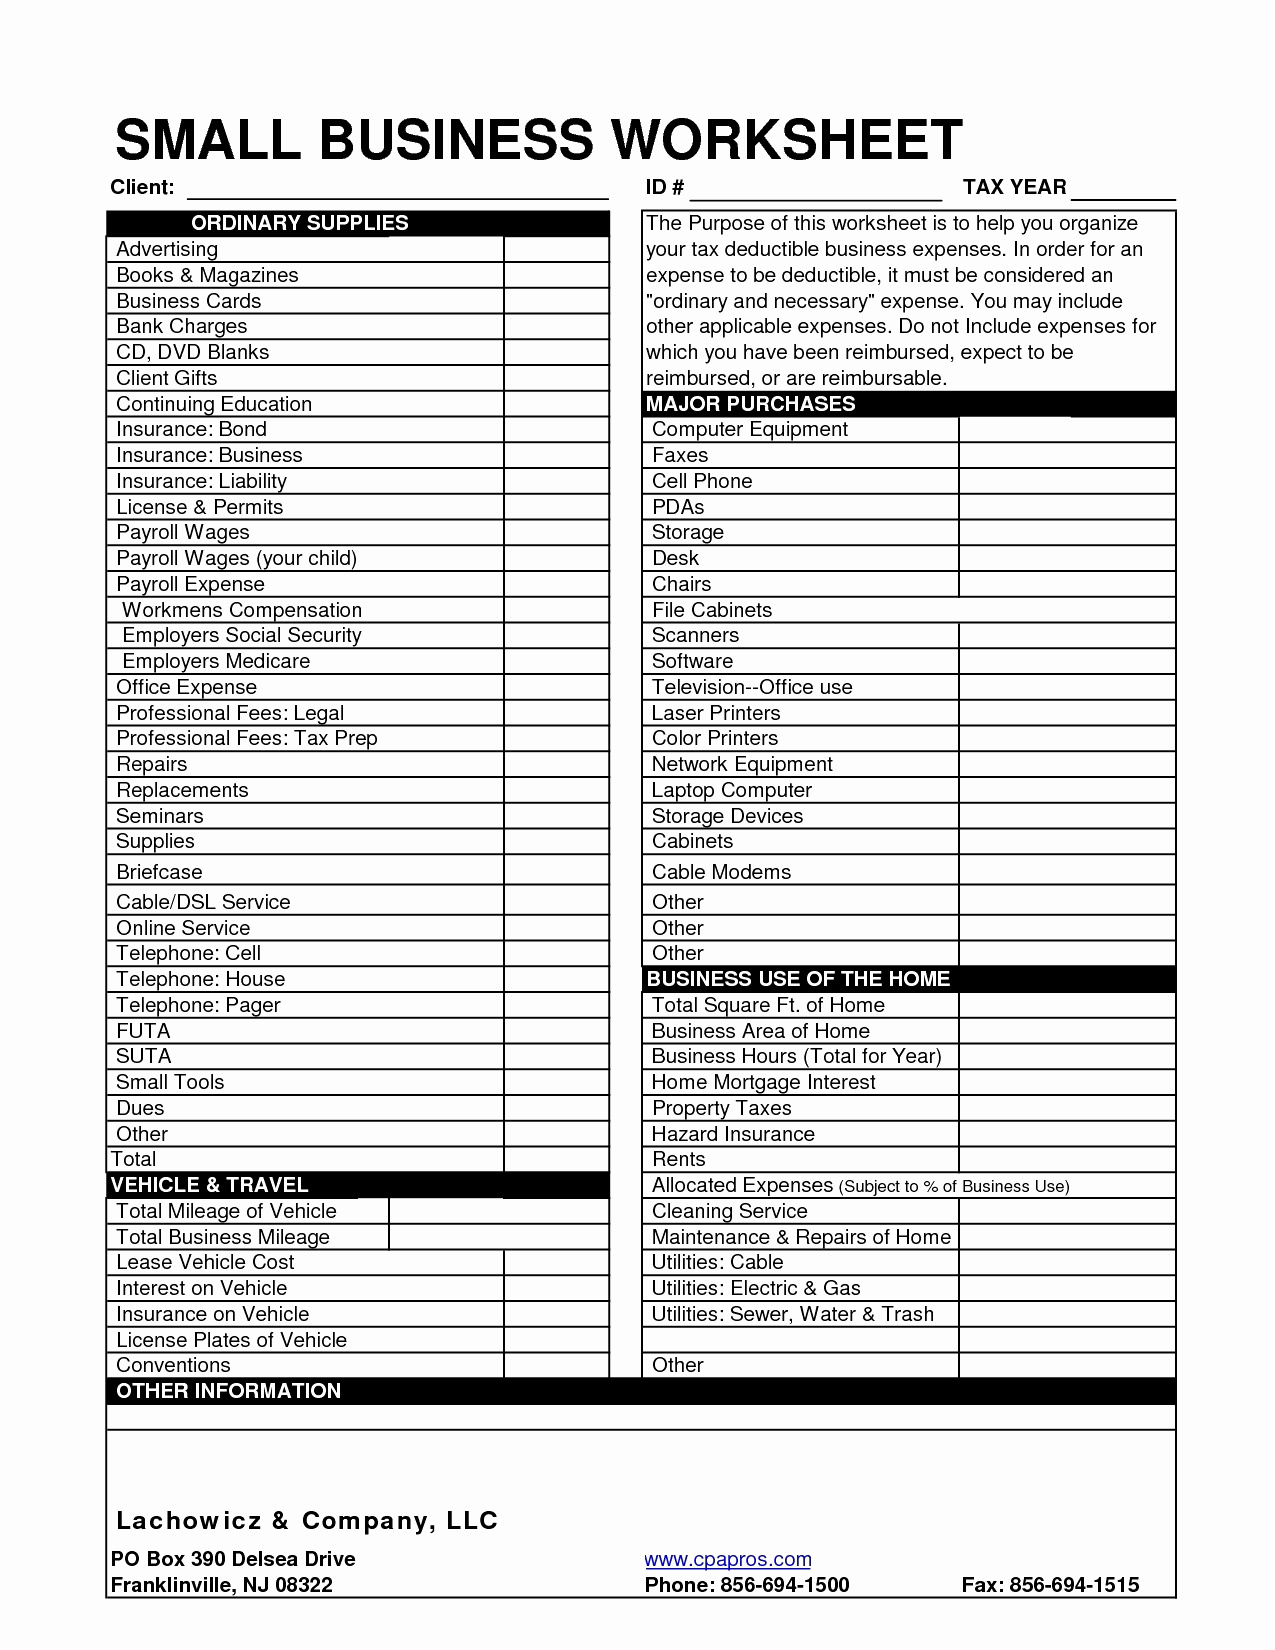 Goodwill Donation Value Guide 2017 Spreadsheet Within Irs Donation Value Guide 2017 Spreadsheet New Goodwill Donation